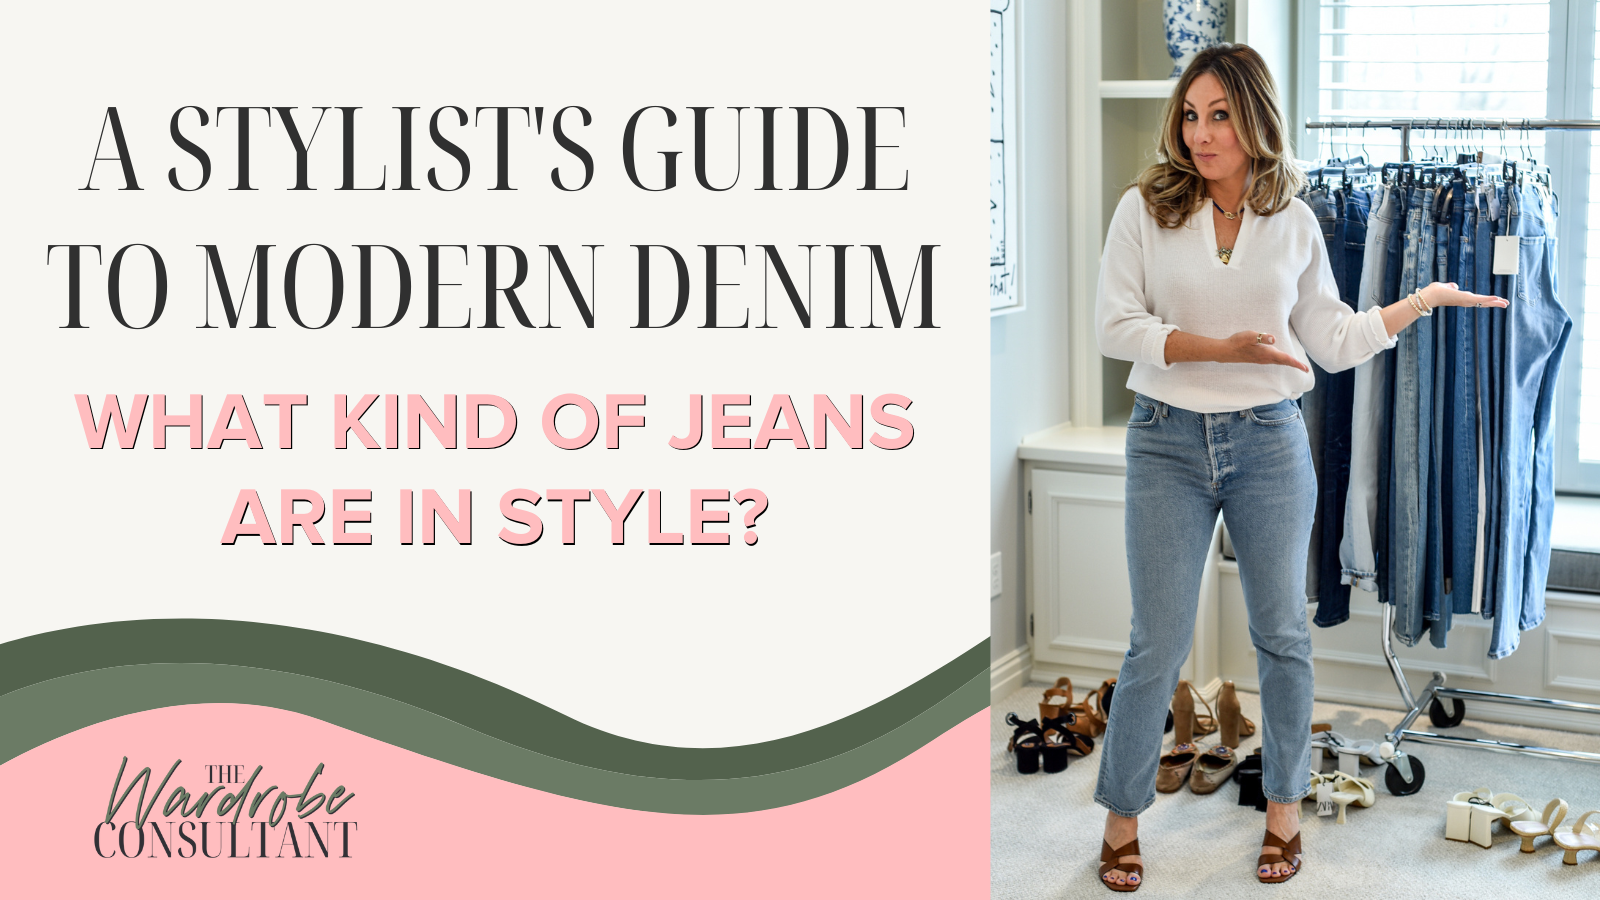 Utility Jeans - Not just for the 1990s anymore, your guide to chic